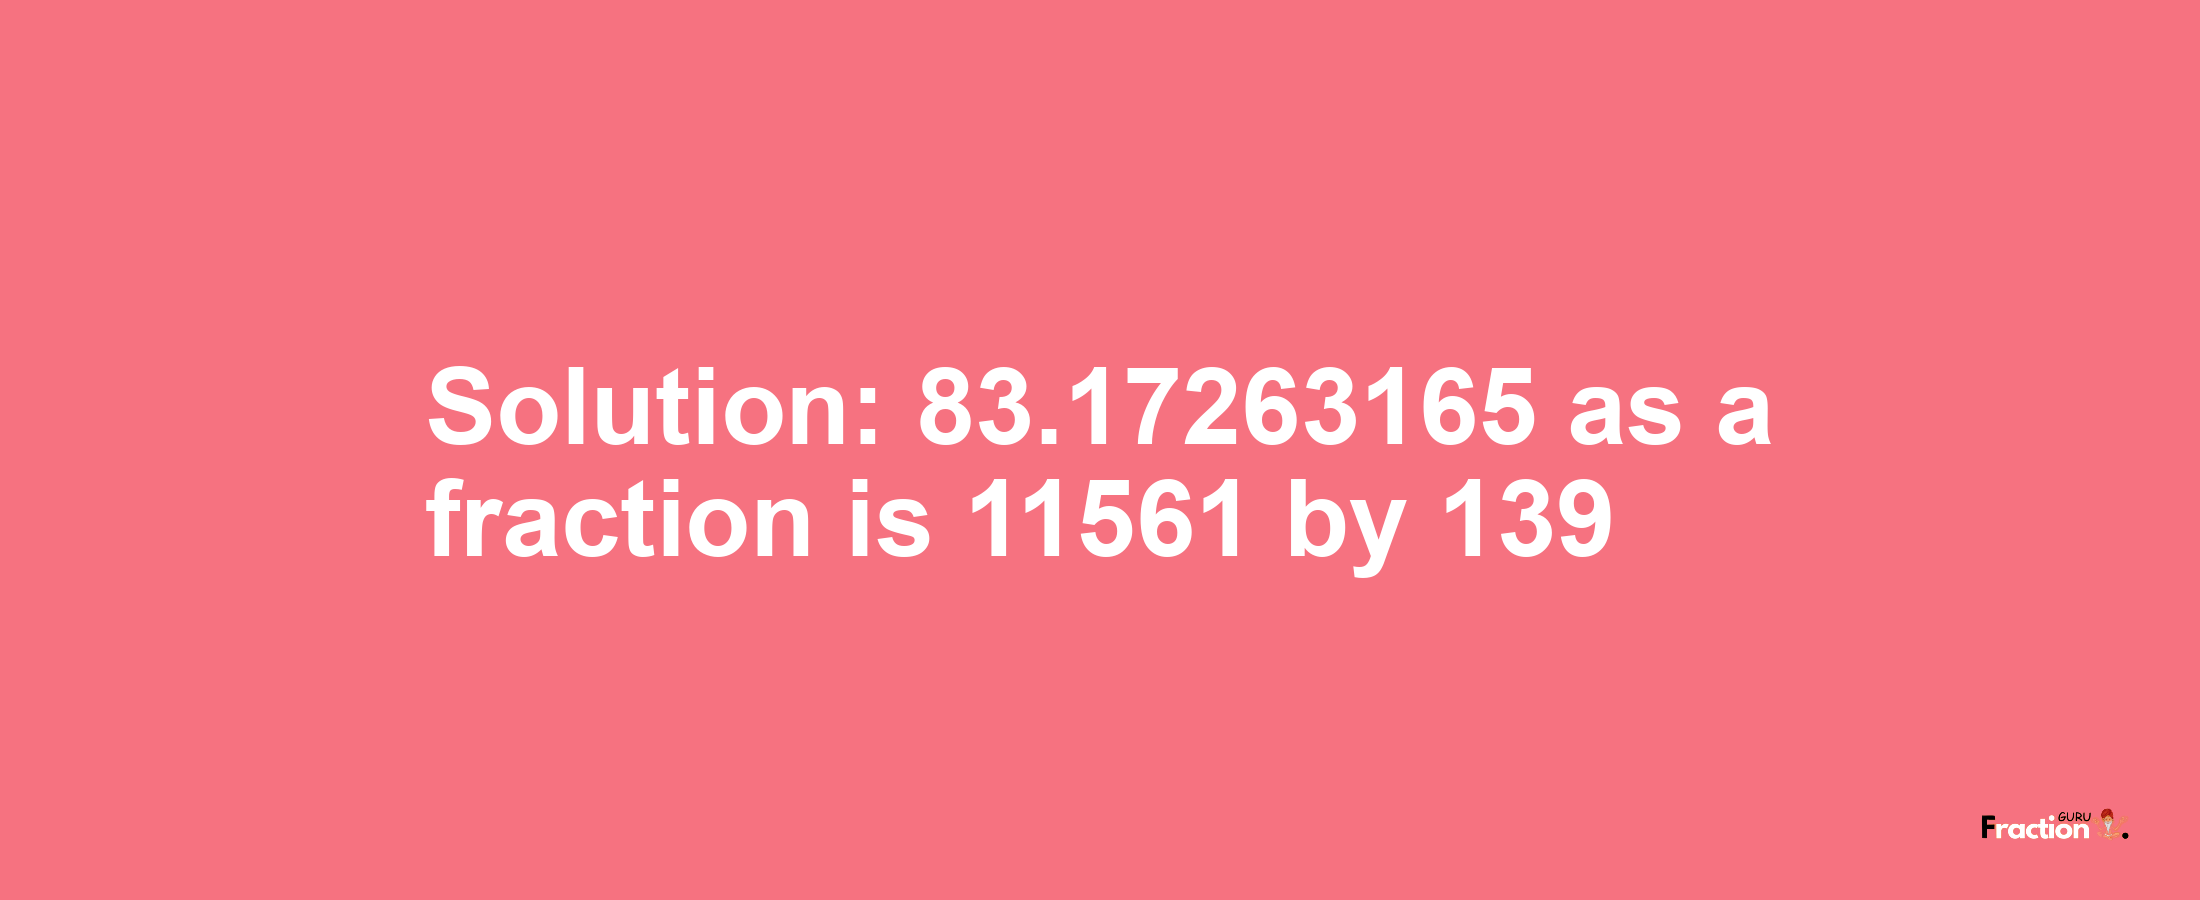 Solution:83.17263165 as a fraction is 11561/139